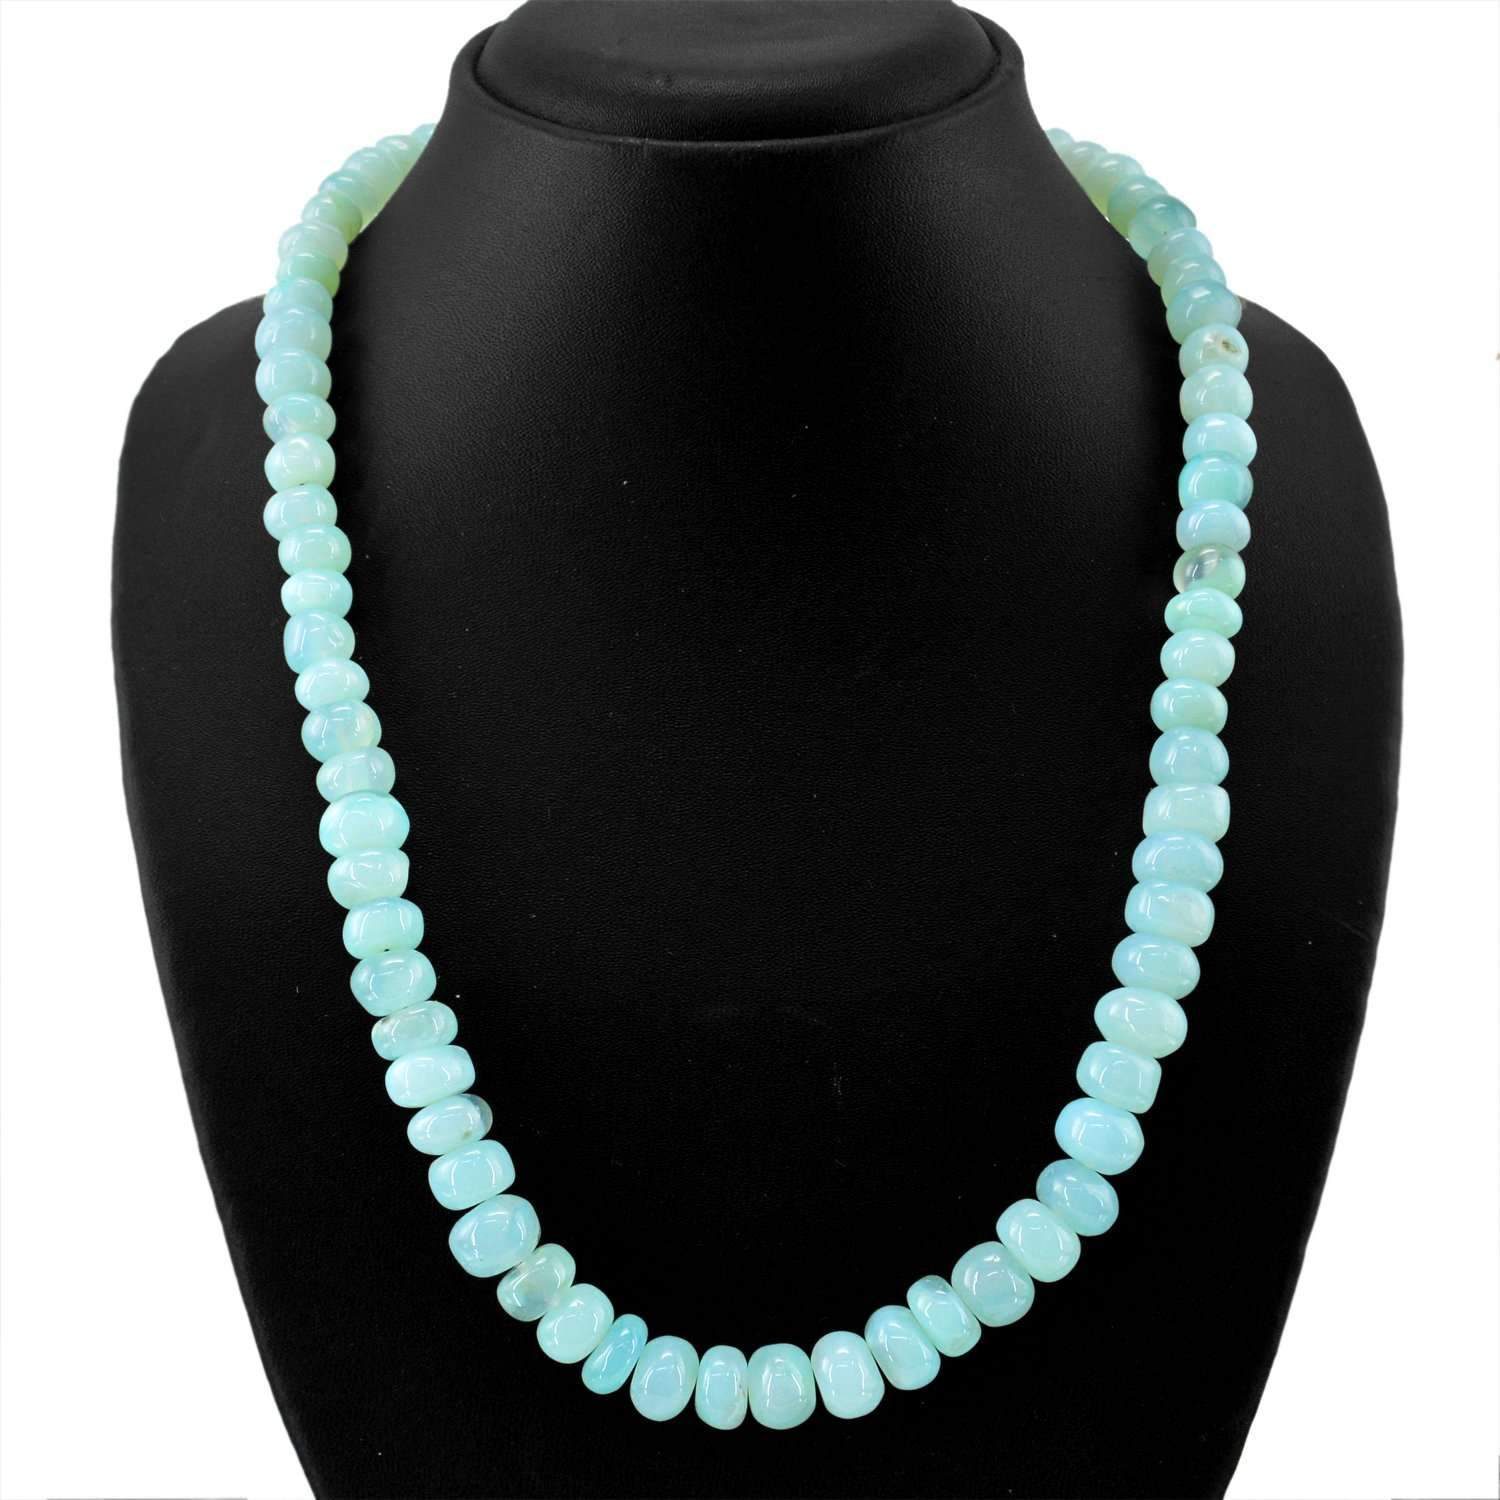 gemsmore:Natural Blue Chalcedony Necklace Round Beads - 20 Inches Long